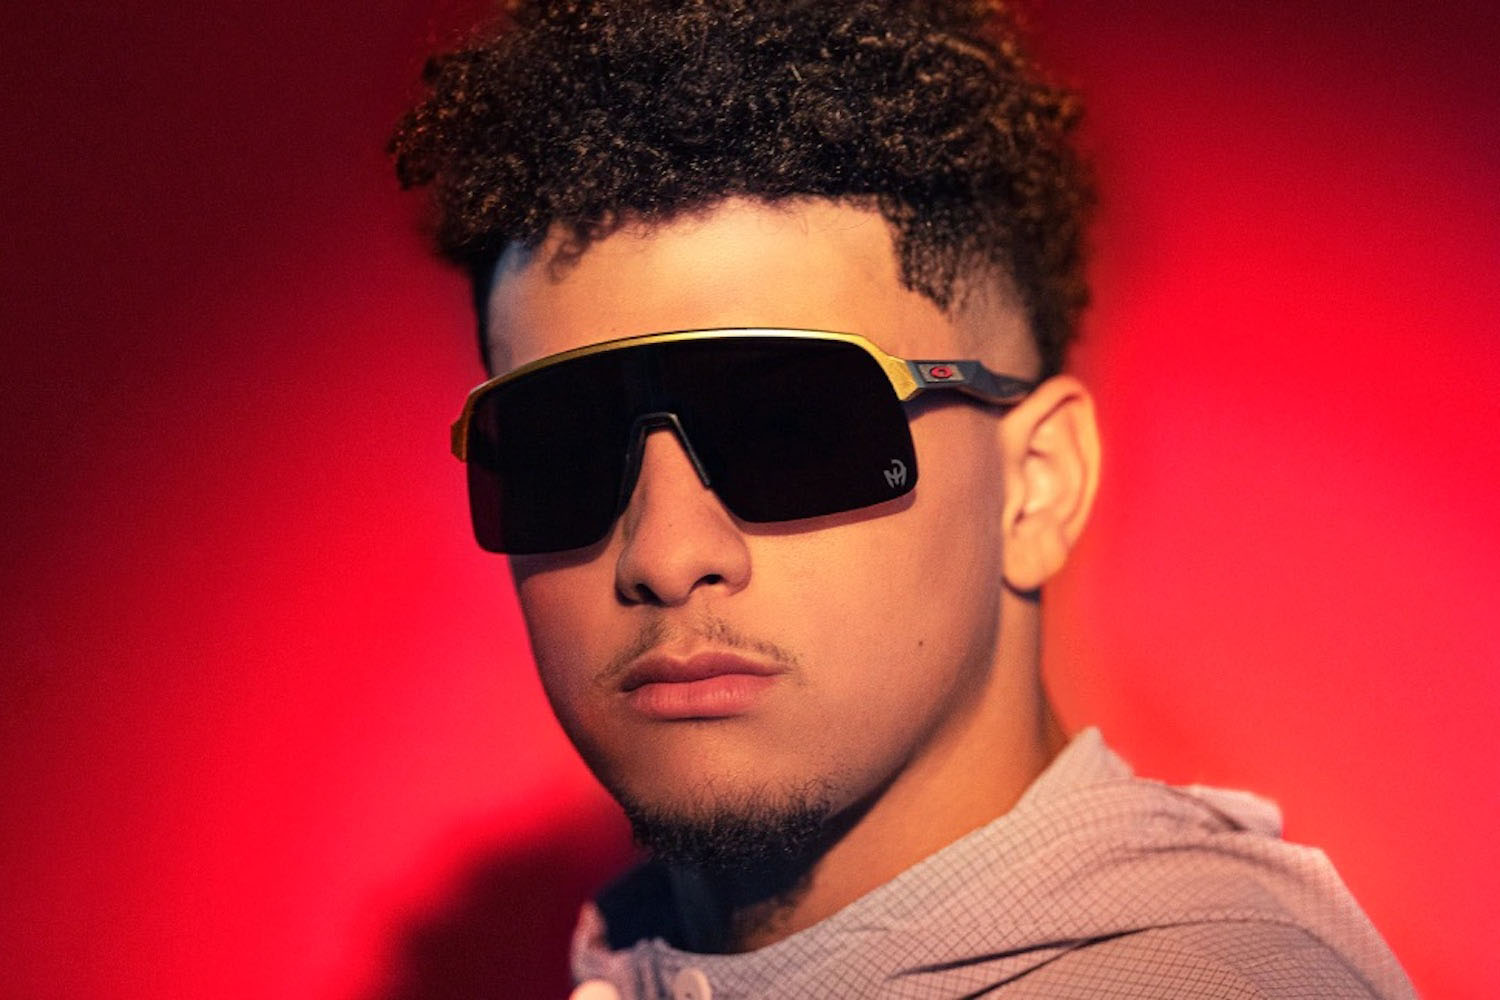 NFL quarterback Patrikc Mahomes wearing Oakley sunglasses against a red background